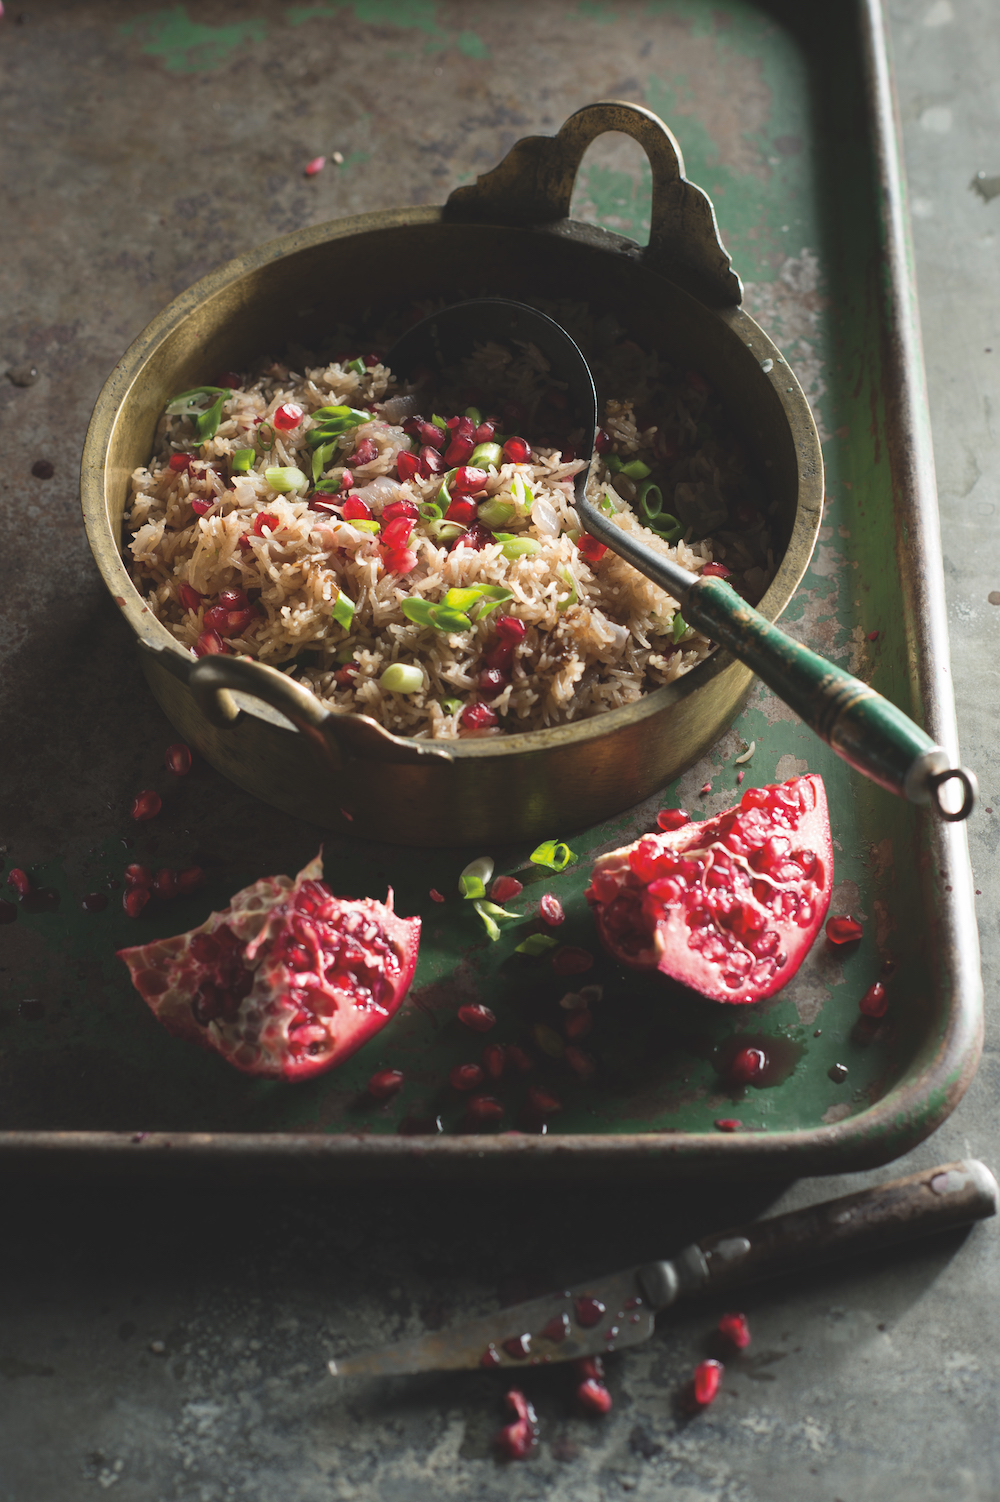 Pomegranate rice, from Lands of the Curry Leaf, by Peter Kuruvita.